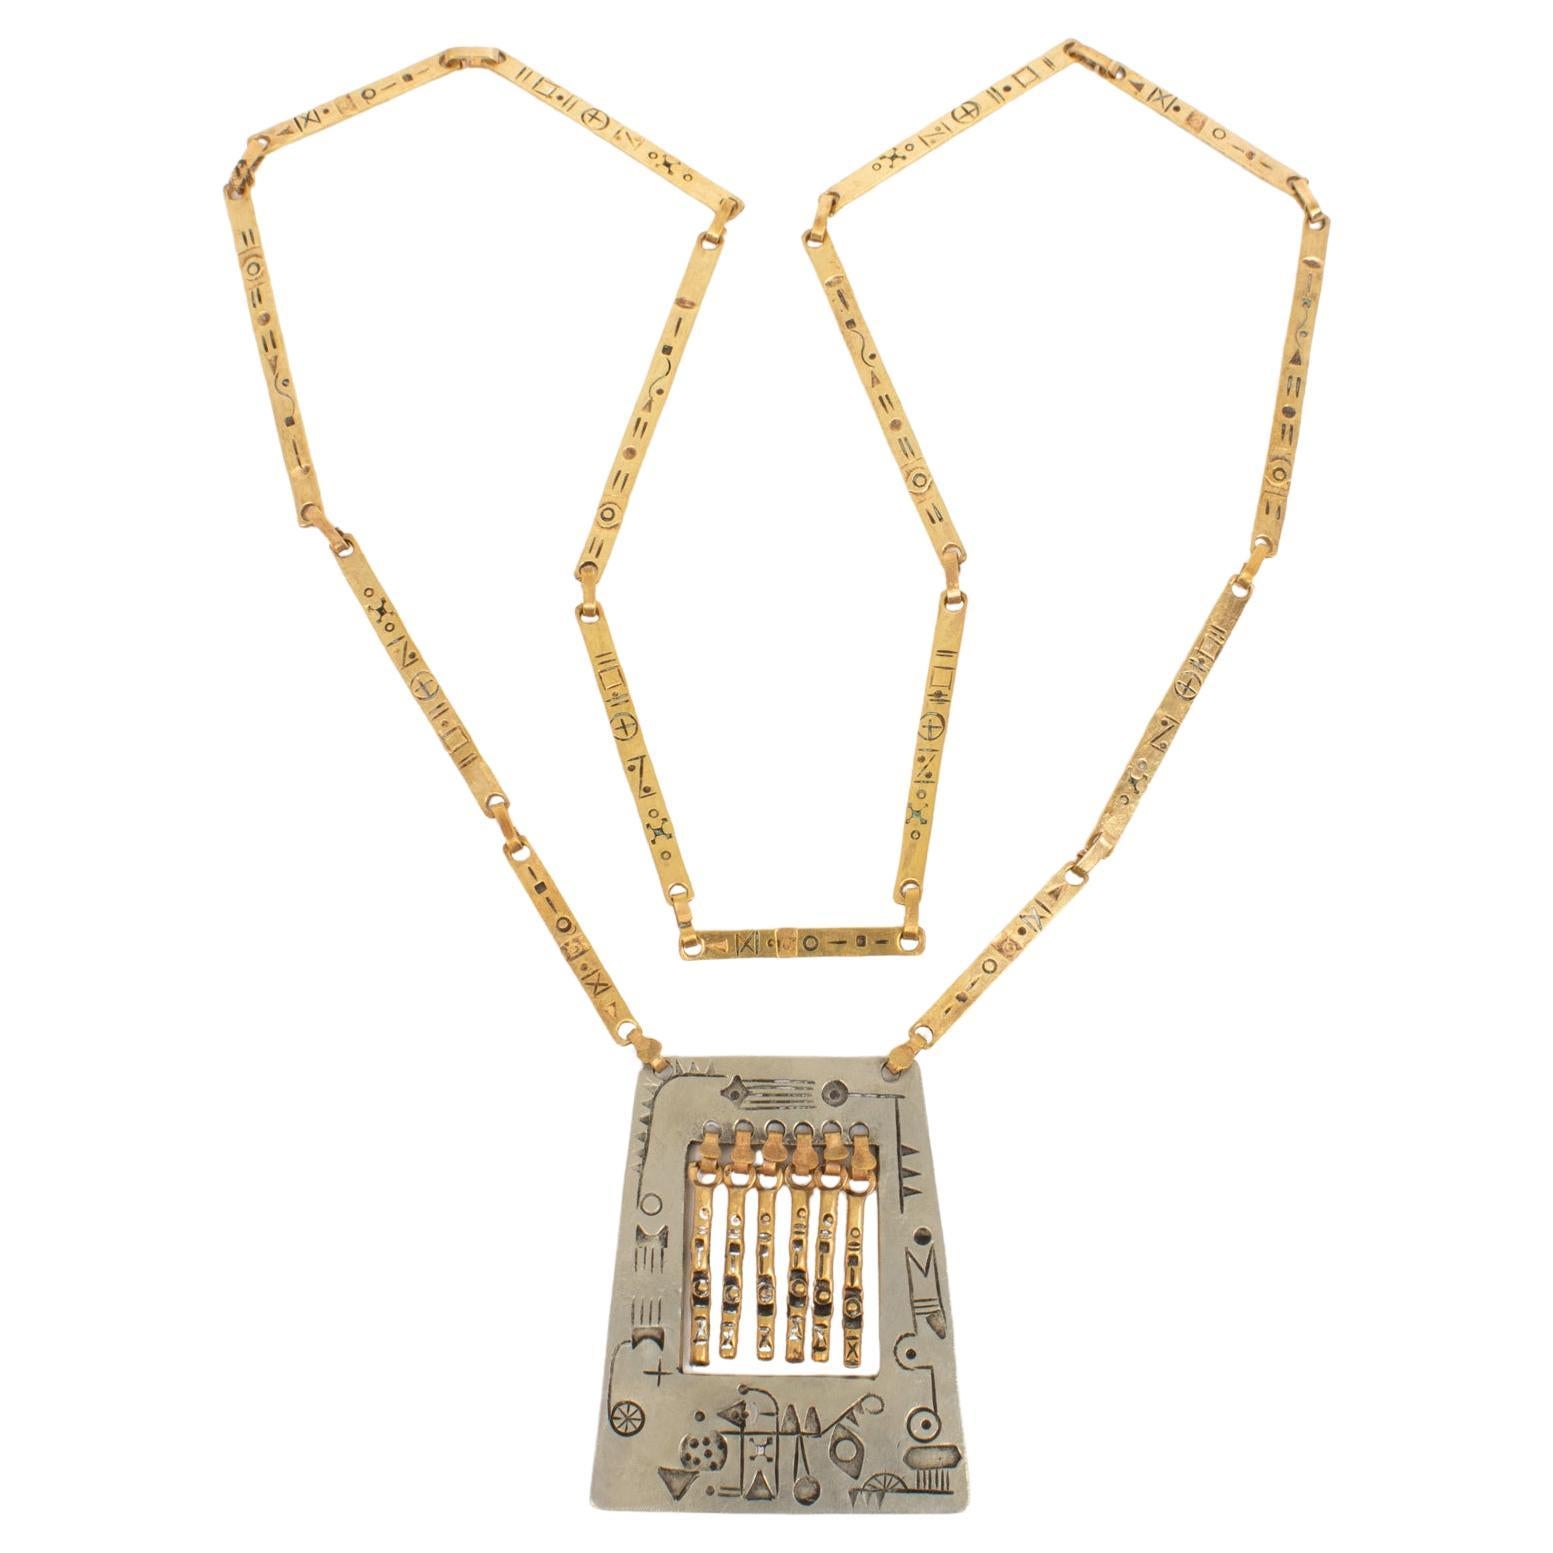 Modernist Brass and Silvered Metal Hieroglyph or Ethnic Graffiti Necklace, 1960s